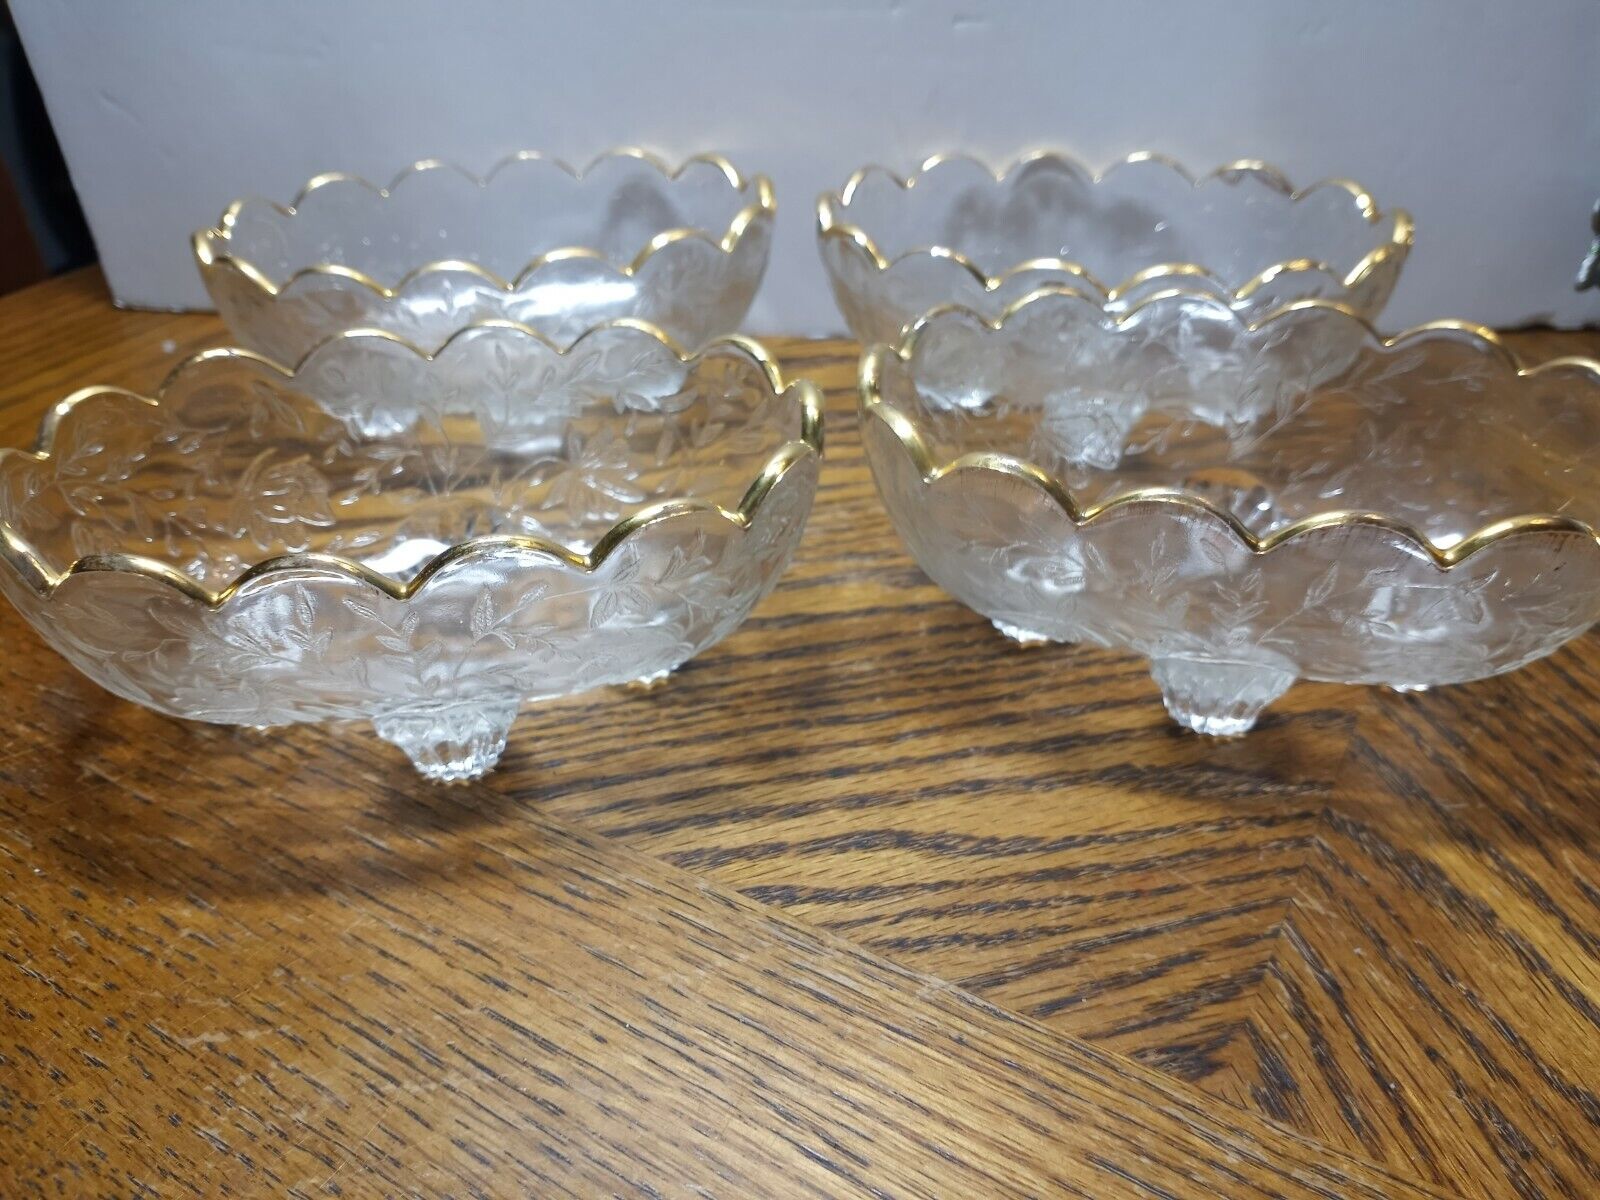 Vintage Oval Small Footed Bowls With Gold Trim. Set of 4